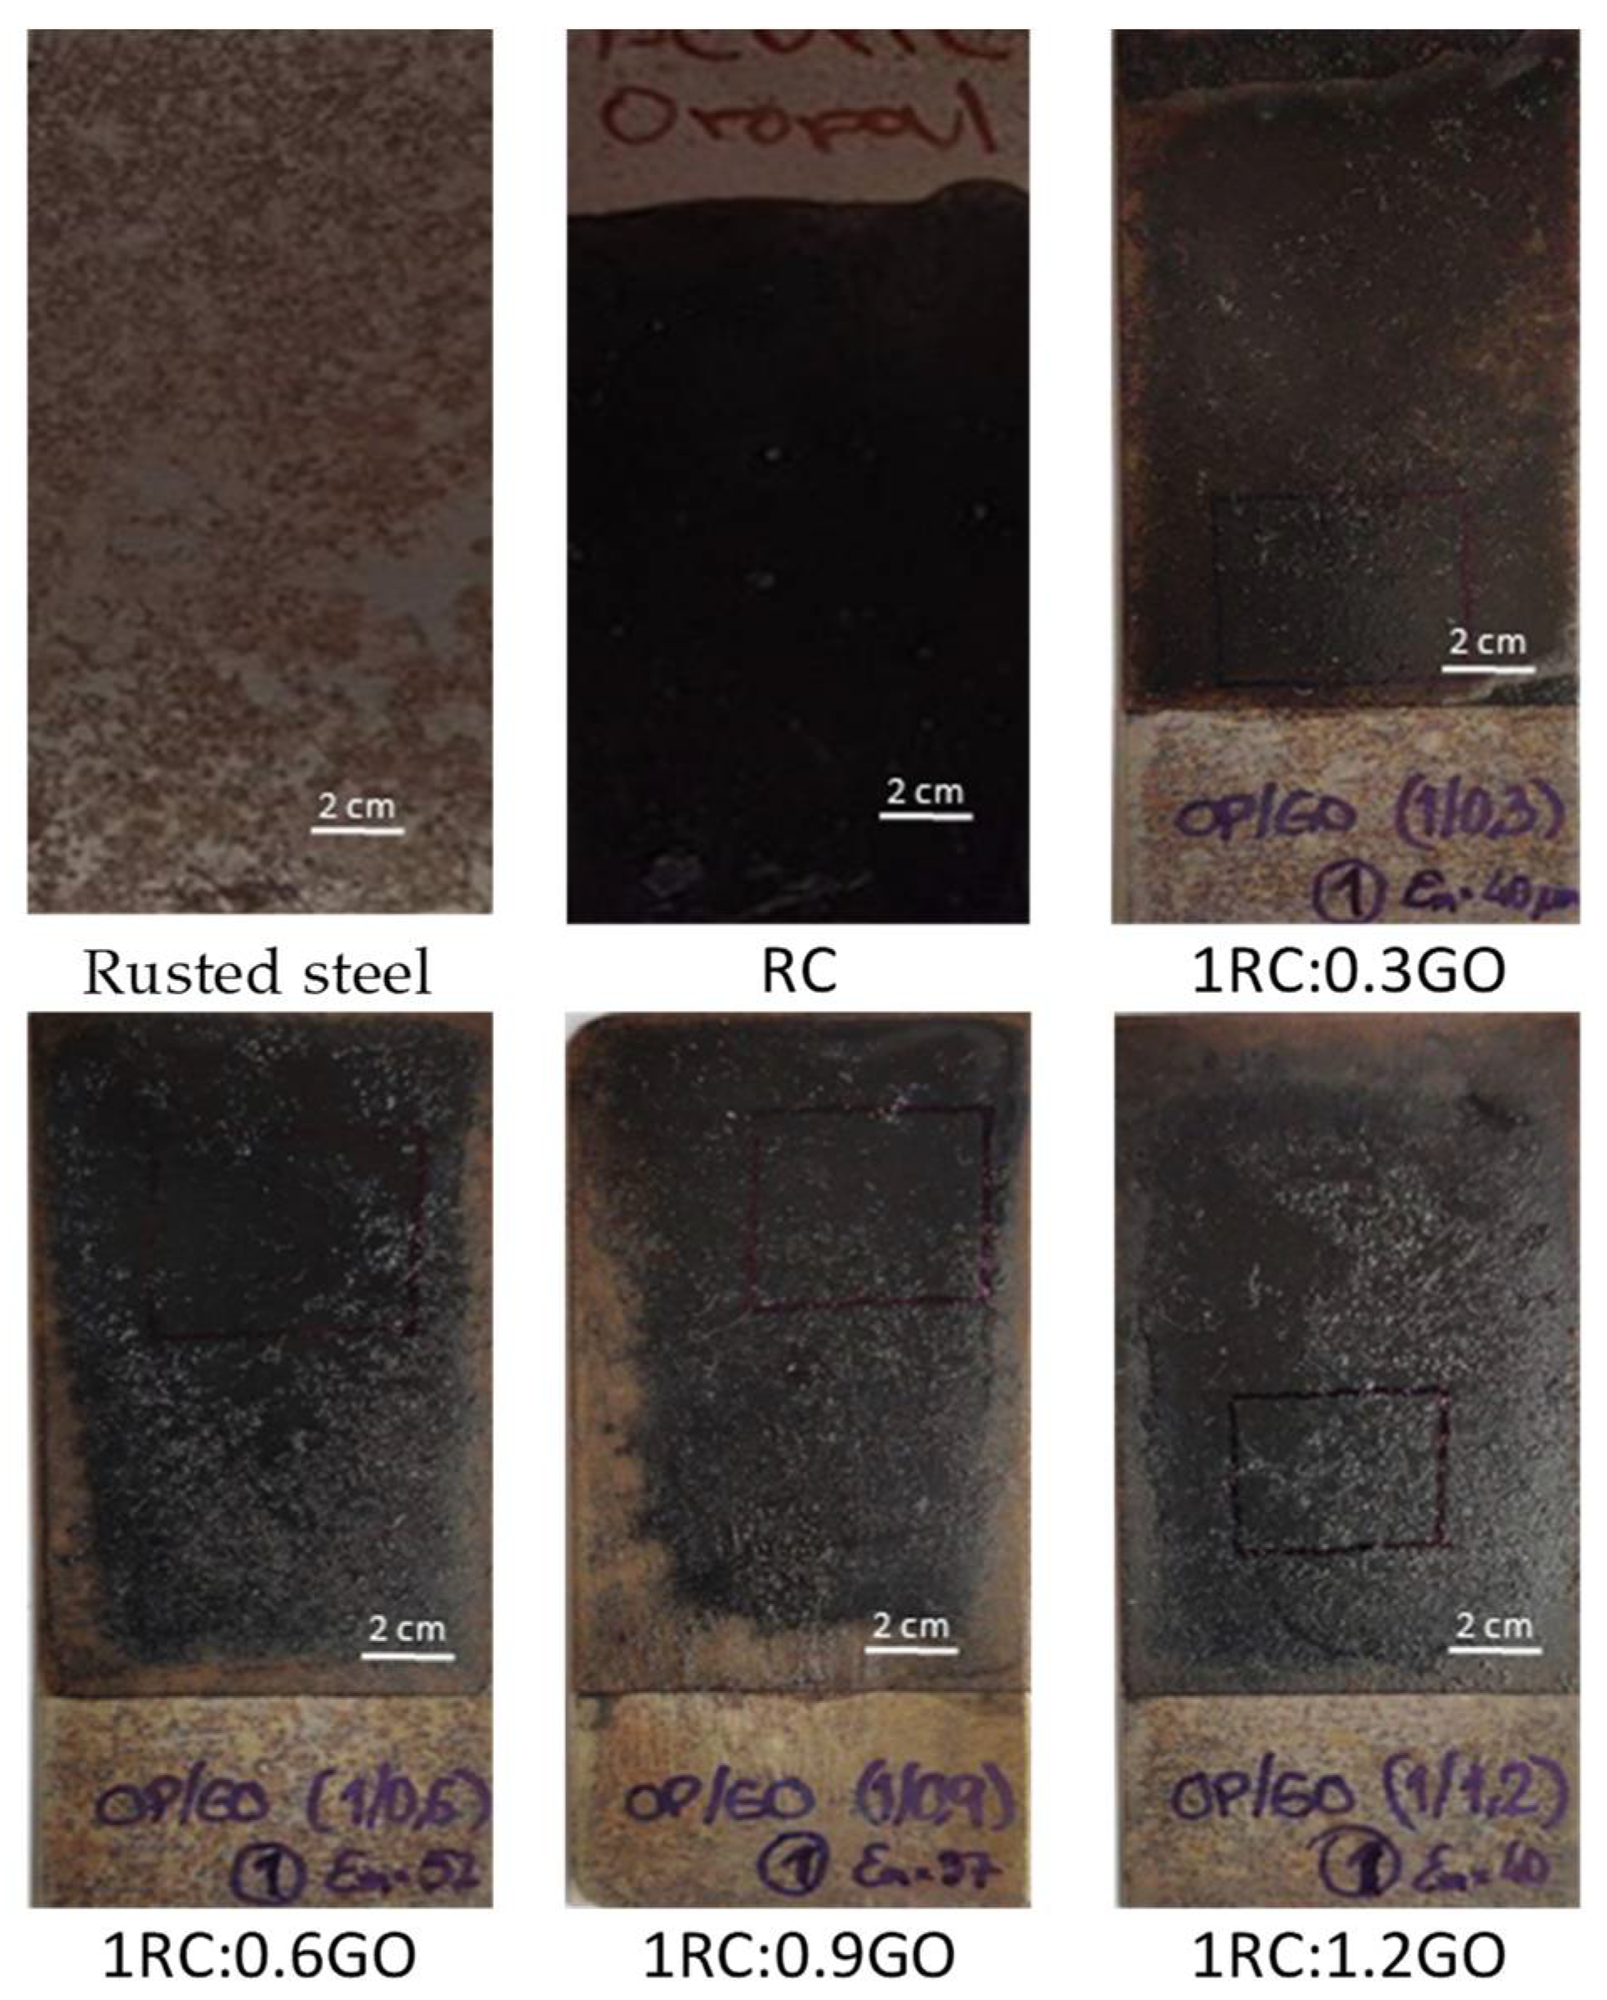 Pictures of rusted steel samples that were coated using the different RC:GO ratios, with 80 mm × 30 mm × 1 mm dimensions.